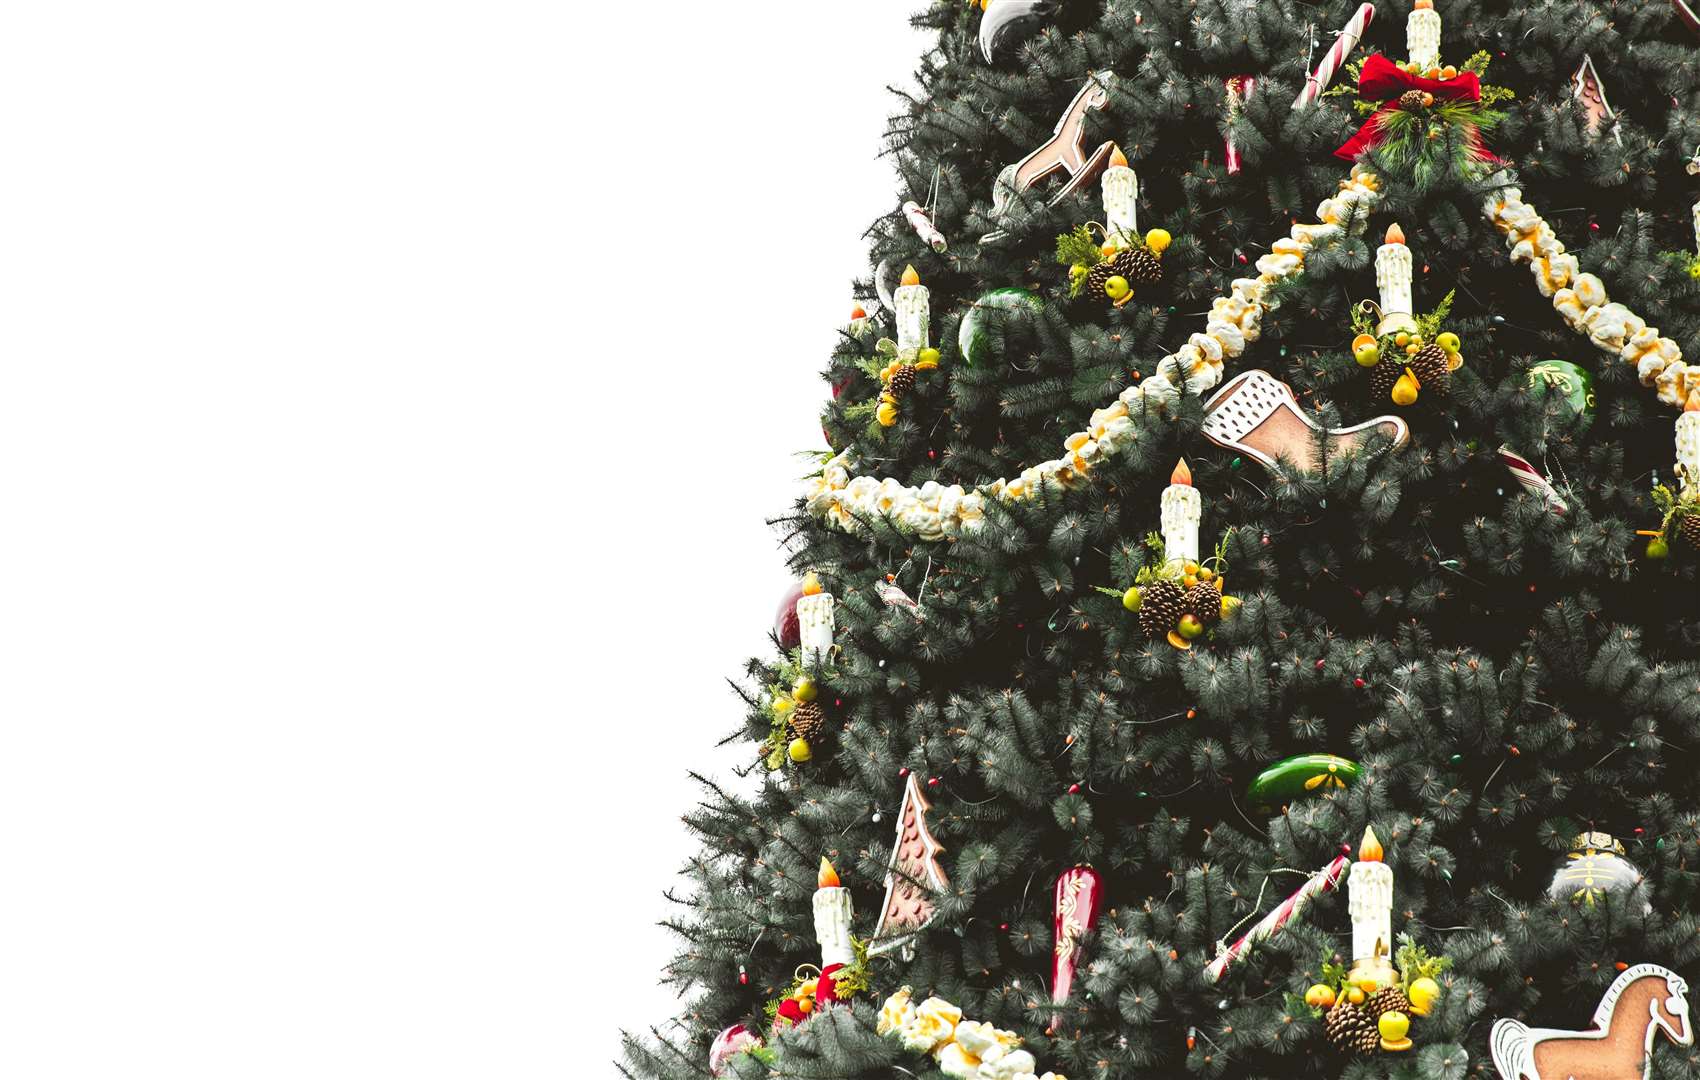 It's time to get rid of your Christmas tree